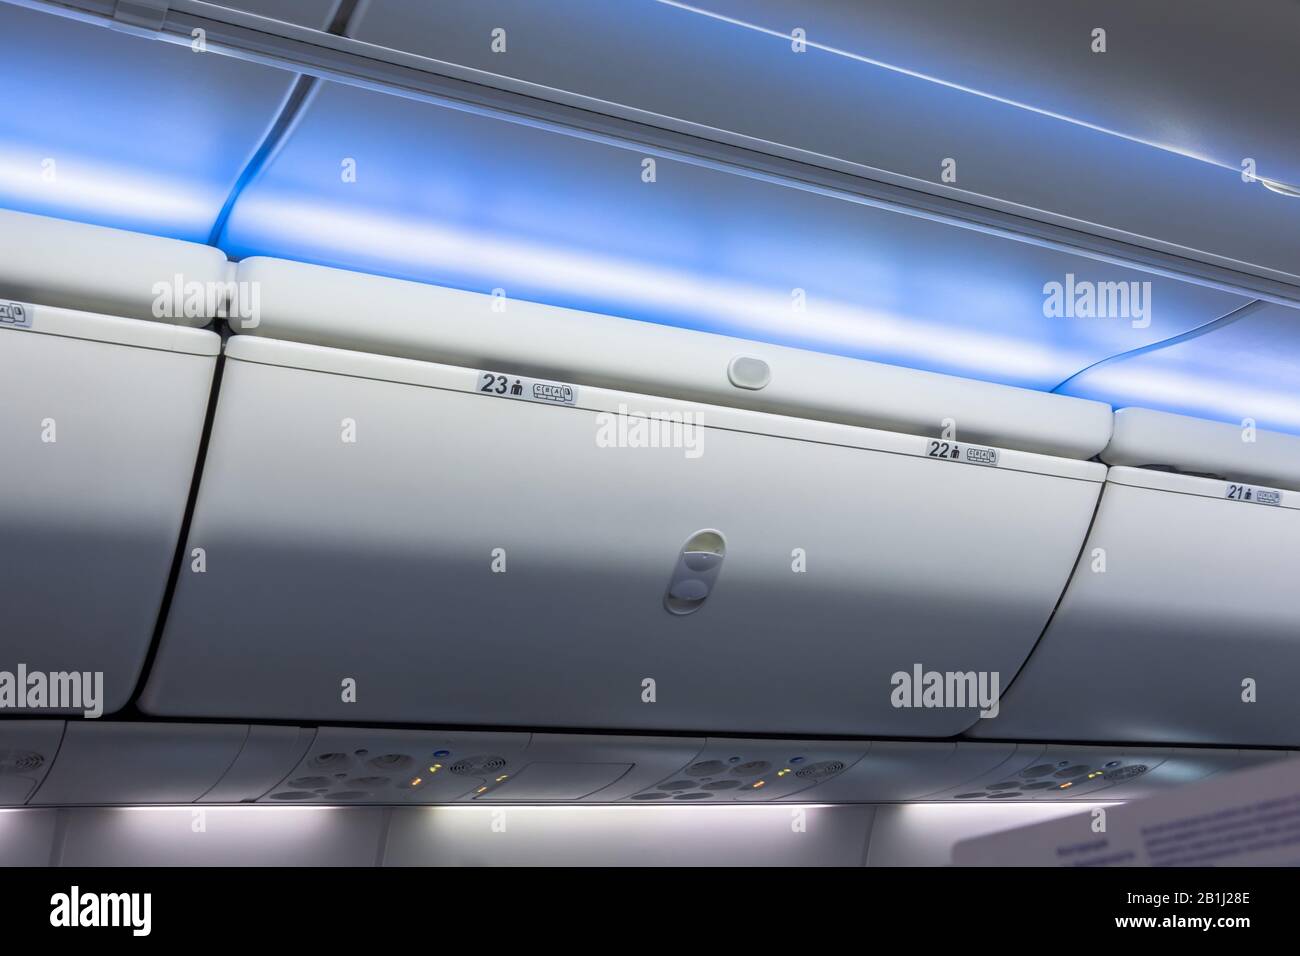 Closed luggage racks for hand luggage in an airplane Stock Photo